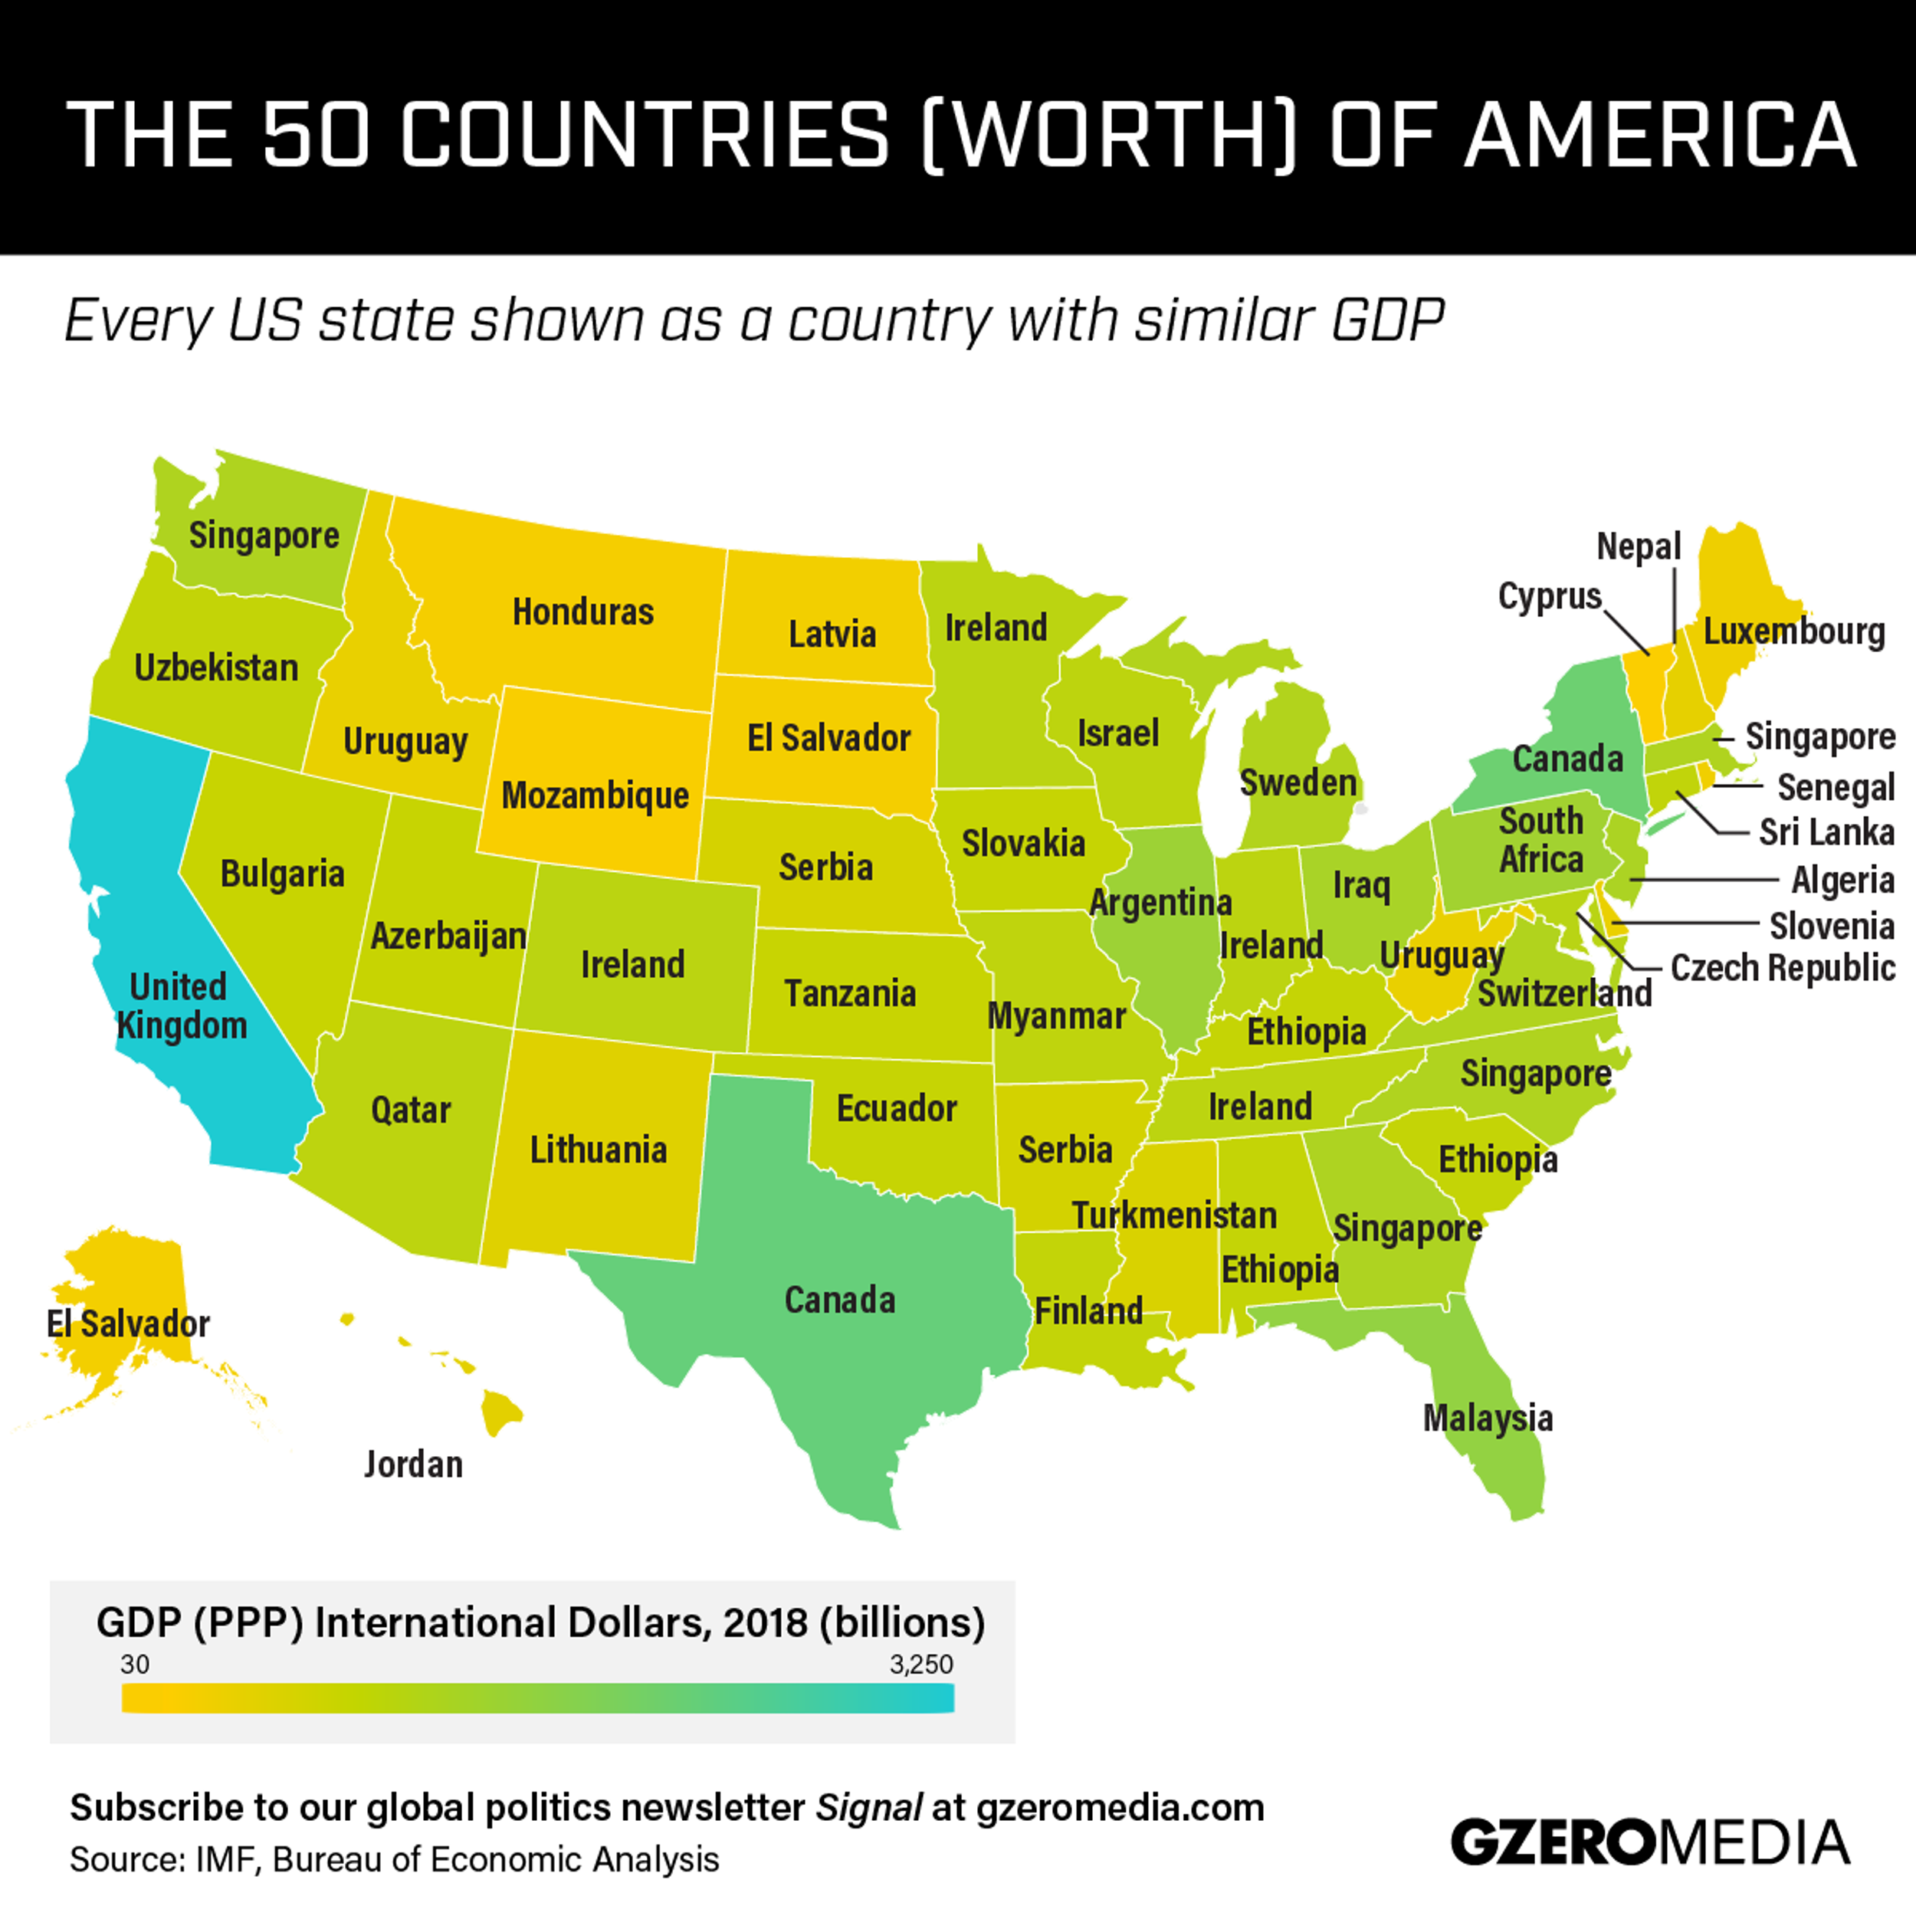 Every US state shown as a country with similar GOP